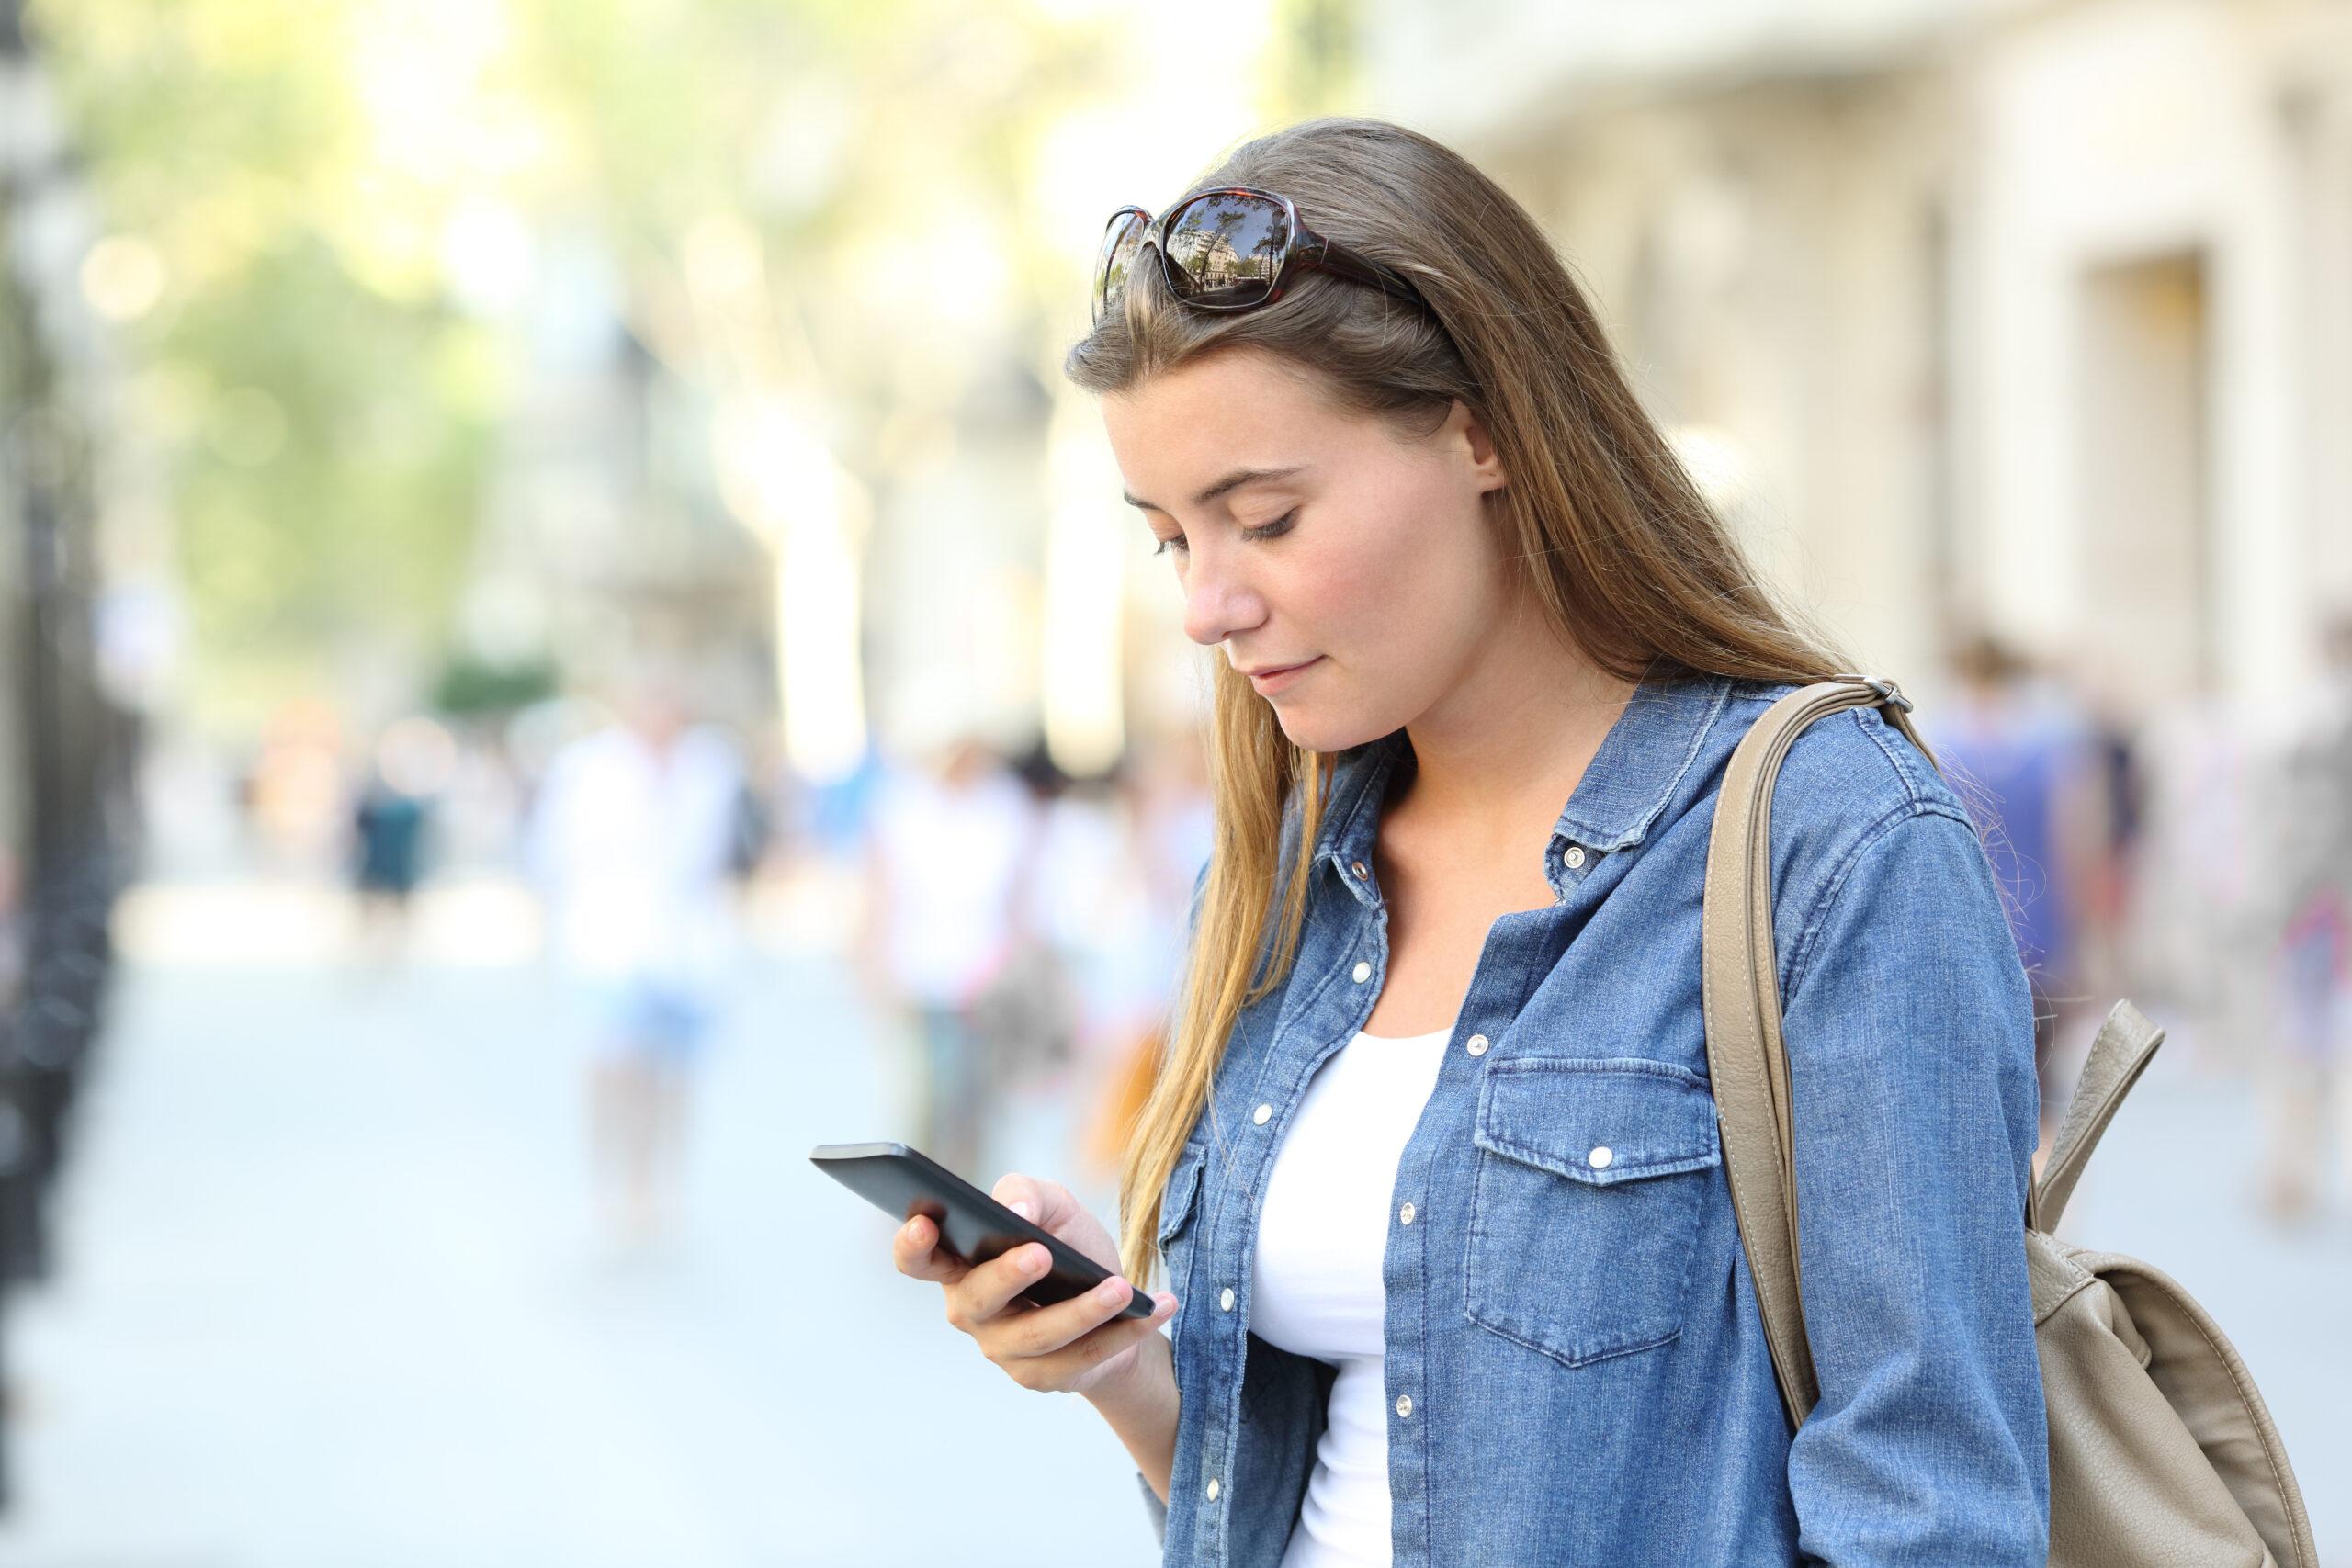 Girl checking smart phone content in a city street